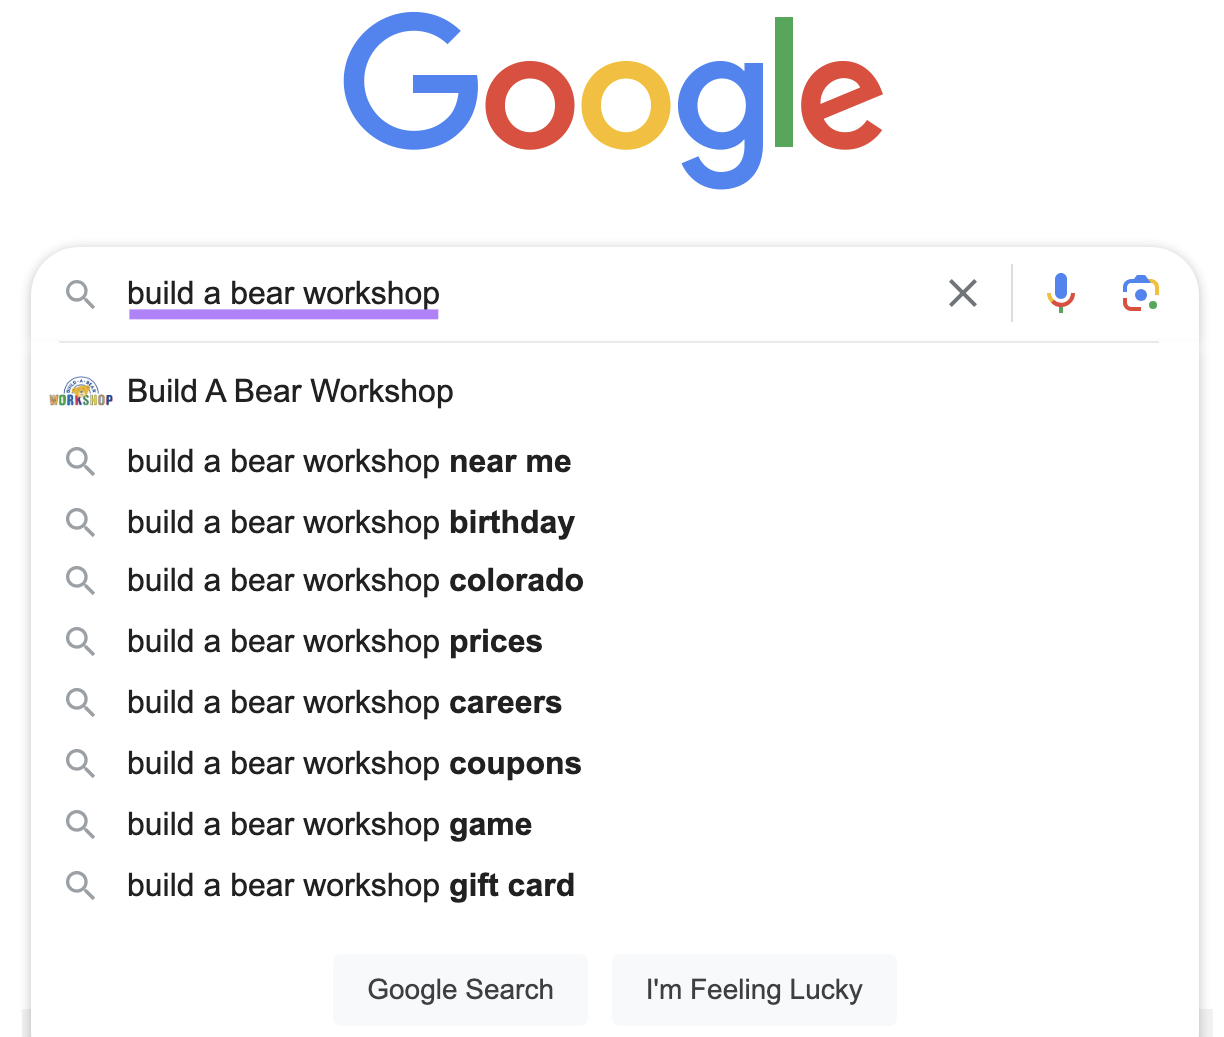 Google suggested searches when typing "build a bear workshop"